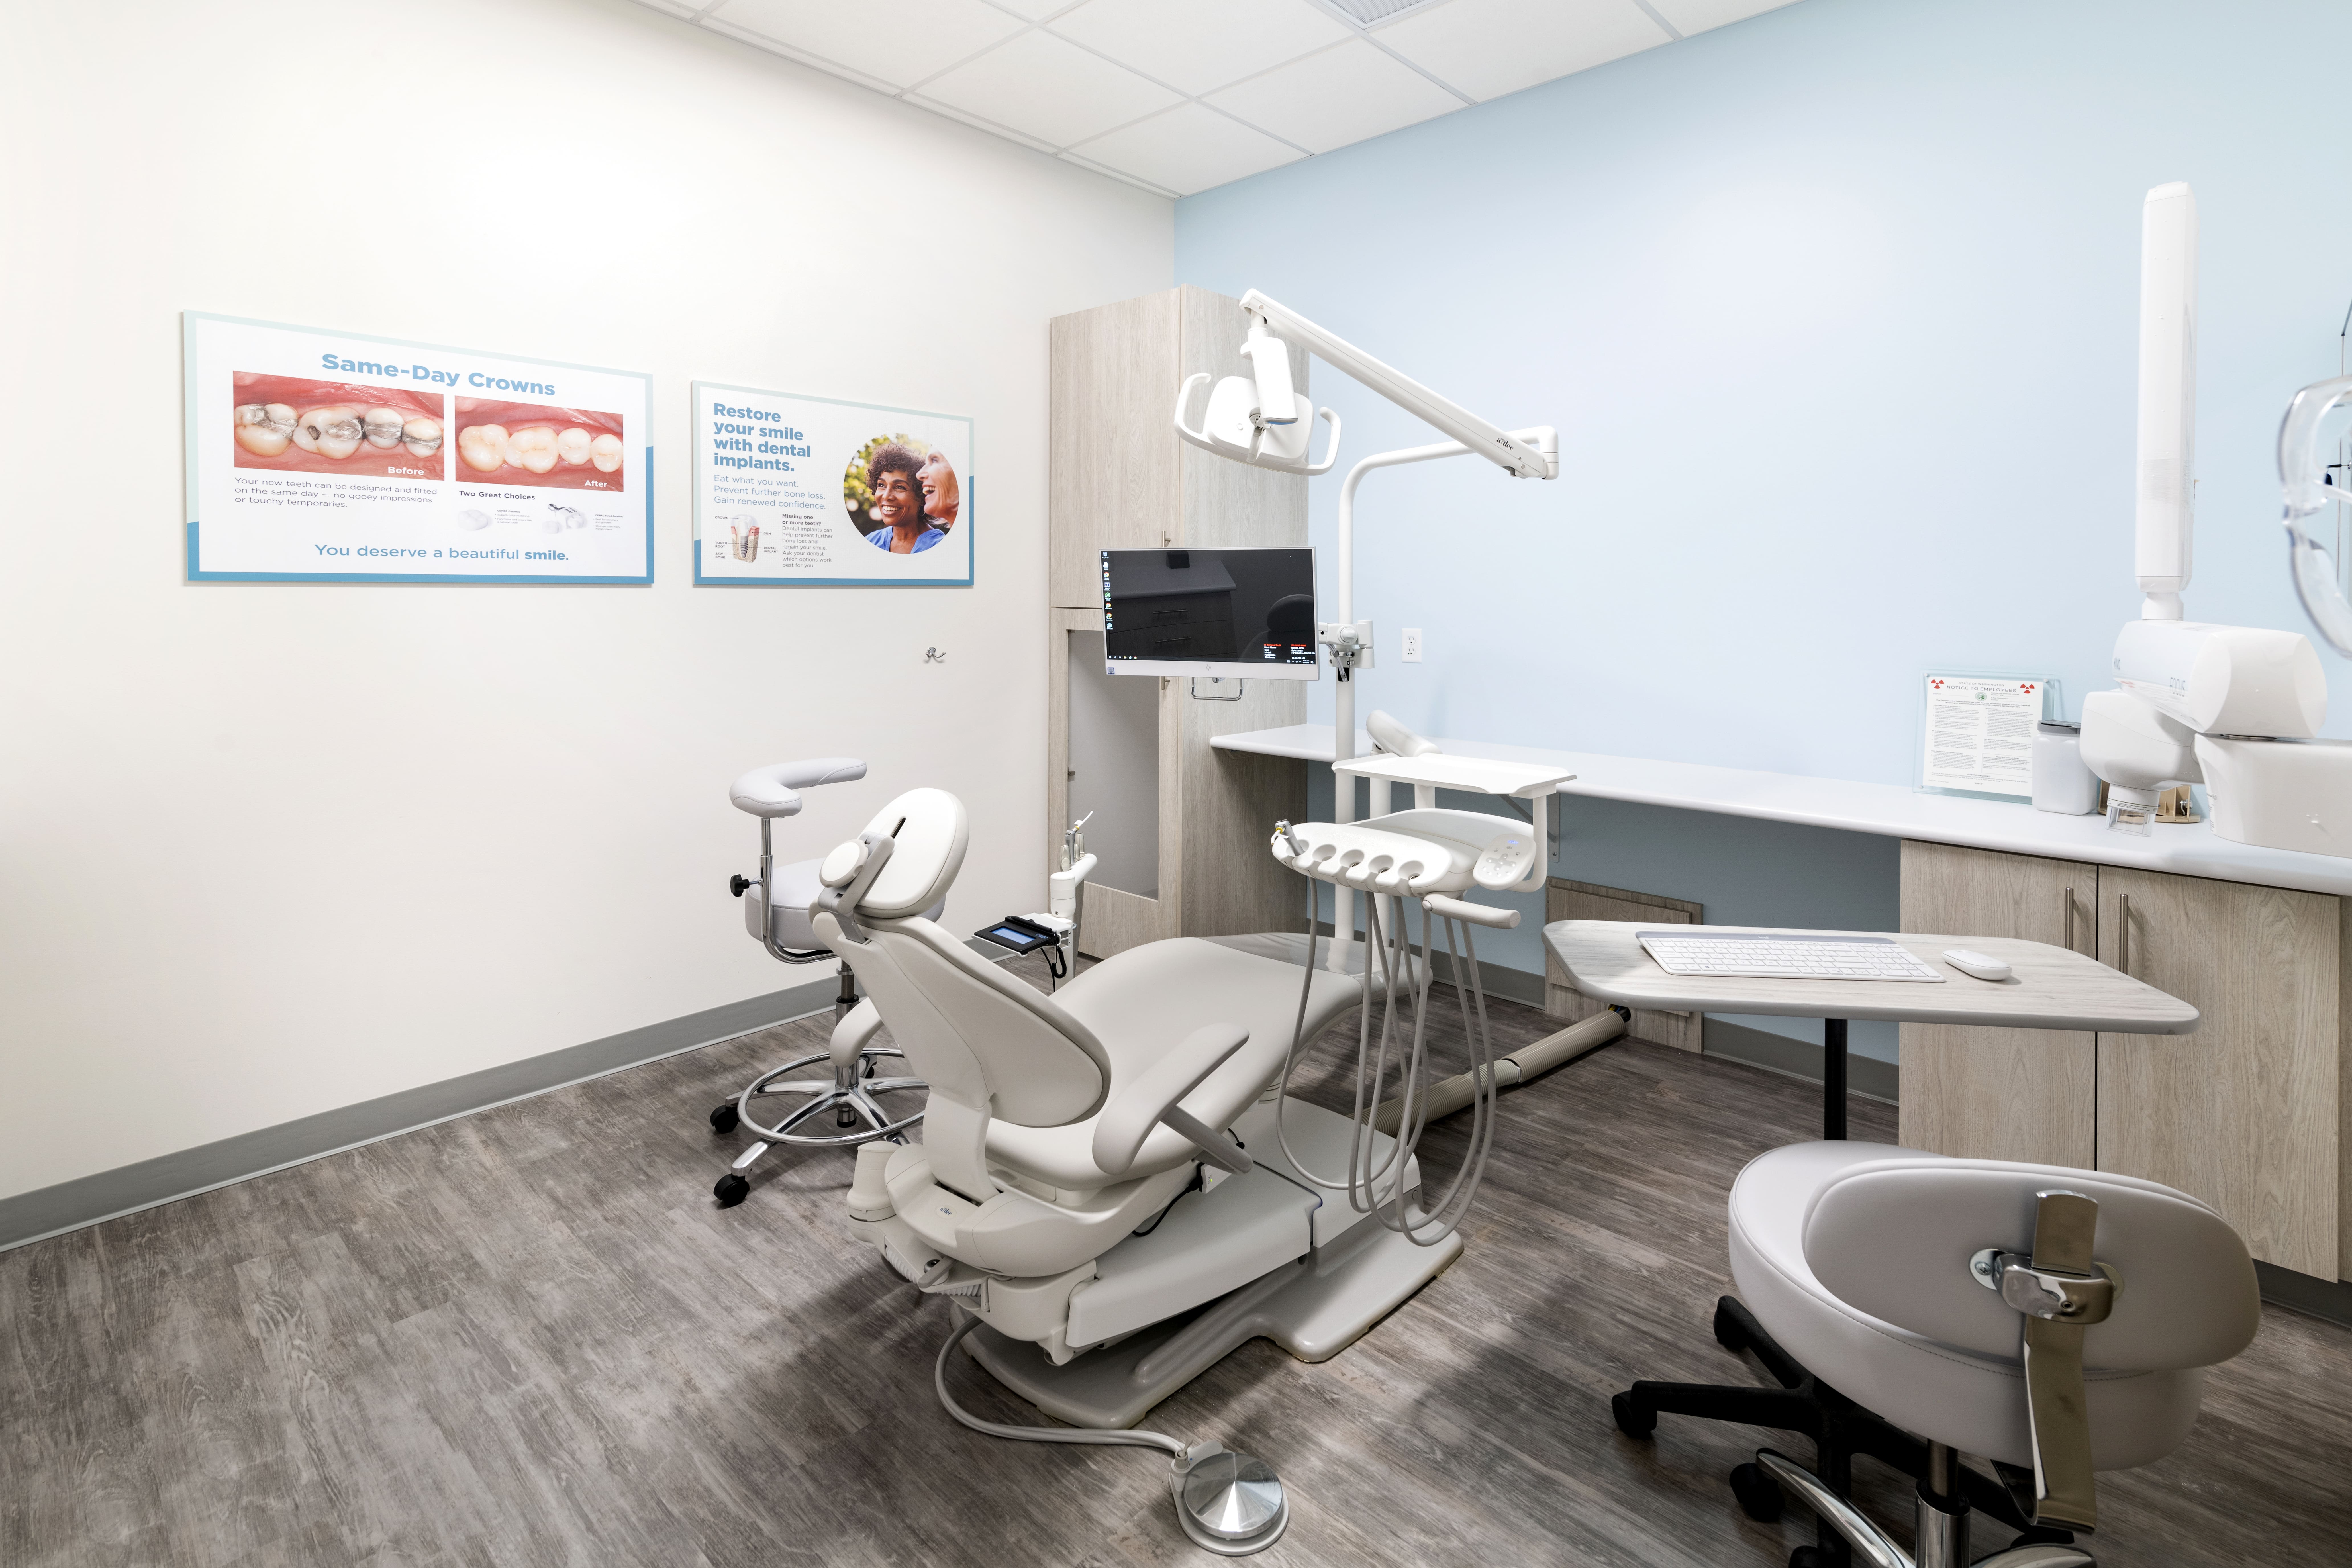 We use state-of-the-art equipment and techniques in all your dental procedures.